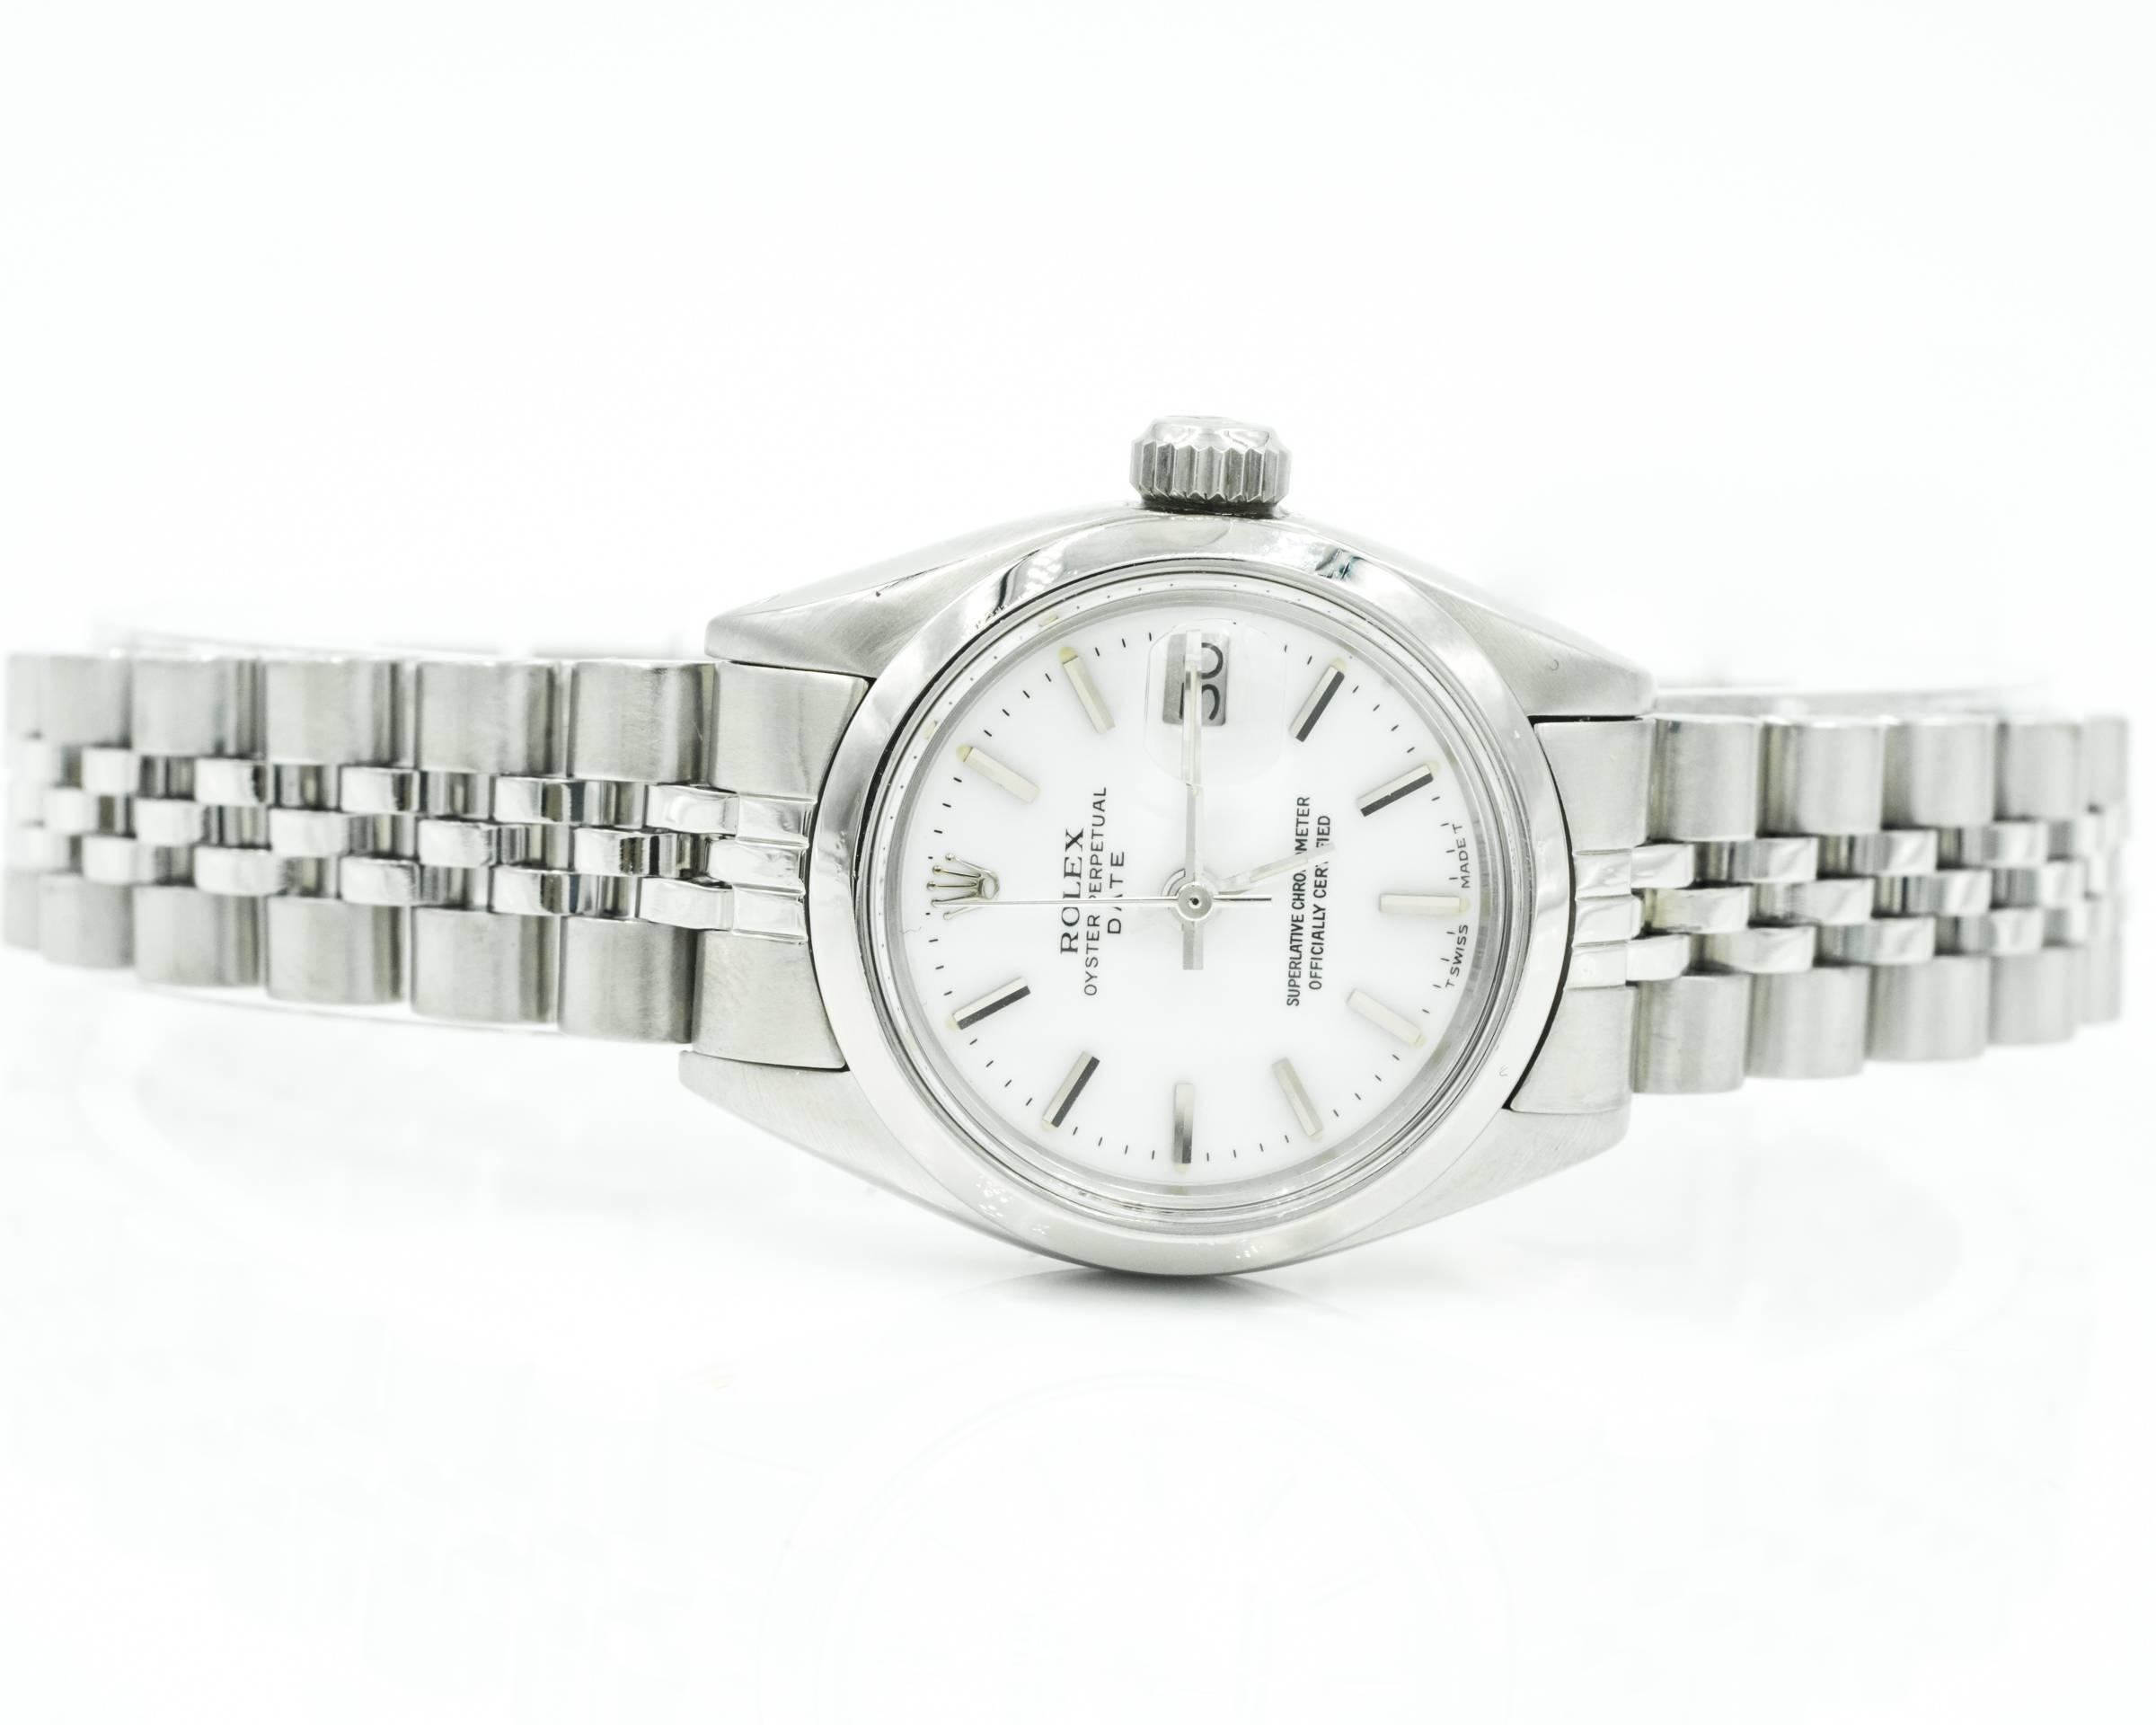 Vintage 1977 Ladies Rolex Date Oyster Perpetual
Stainless Steel, White Dial
Fits up to 8 inch wrist, lots of extra links
Classic Rolex Jubilee bracelet with some slouch. 
Watch has been recently serviced and polished. Amazing condition. 
White